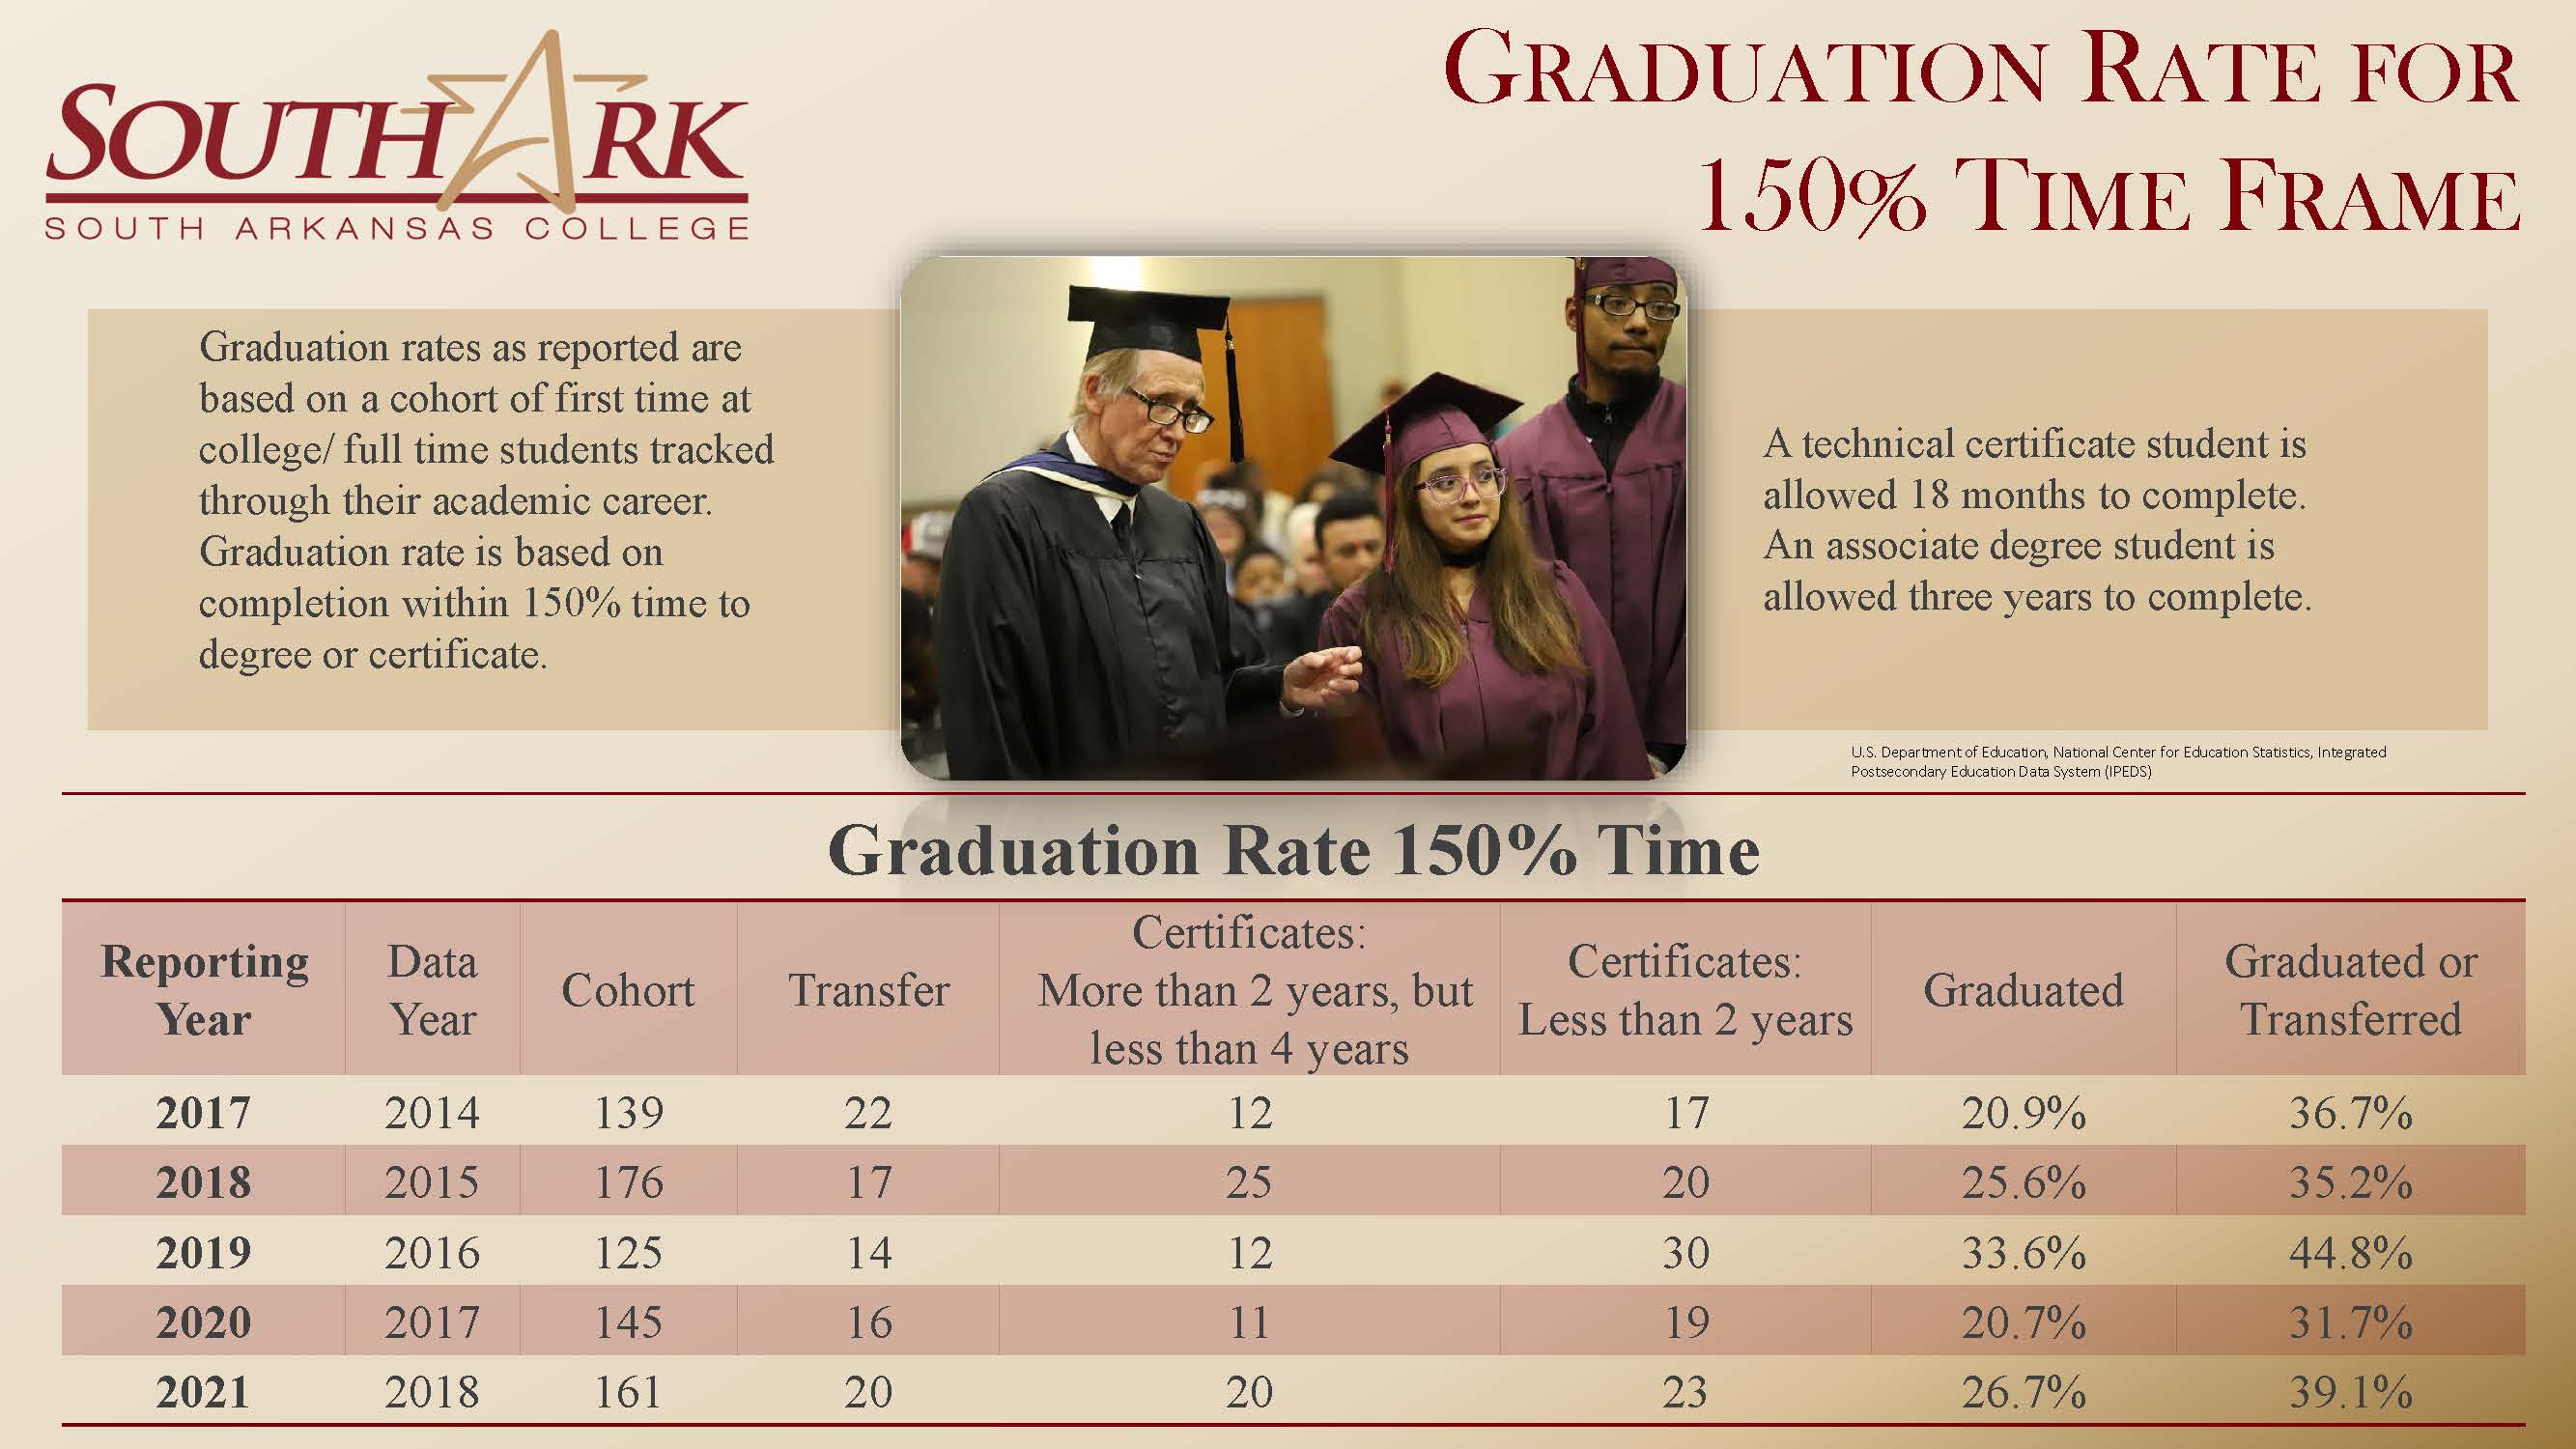 Graduation Rates for 150% Time Frame